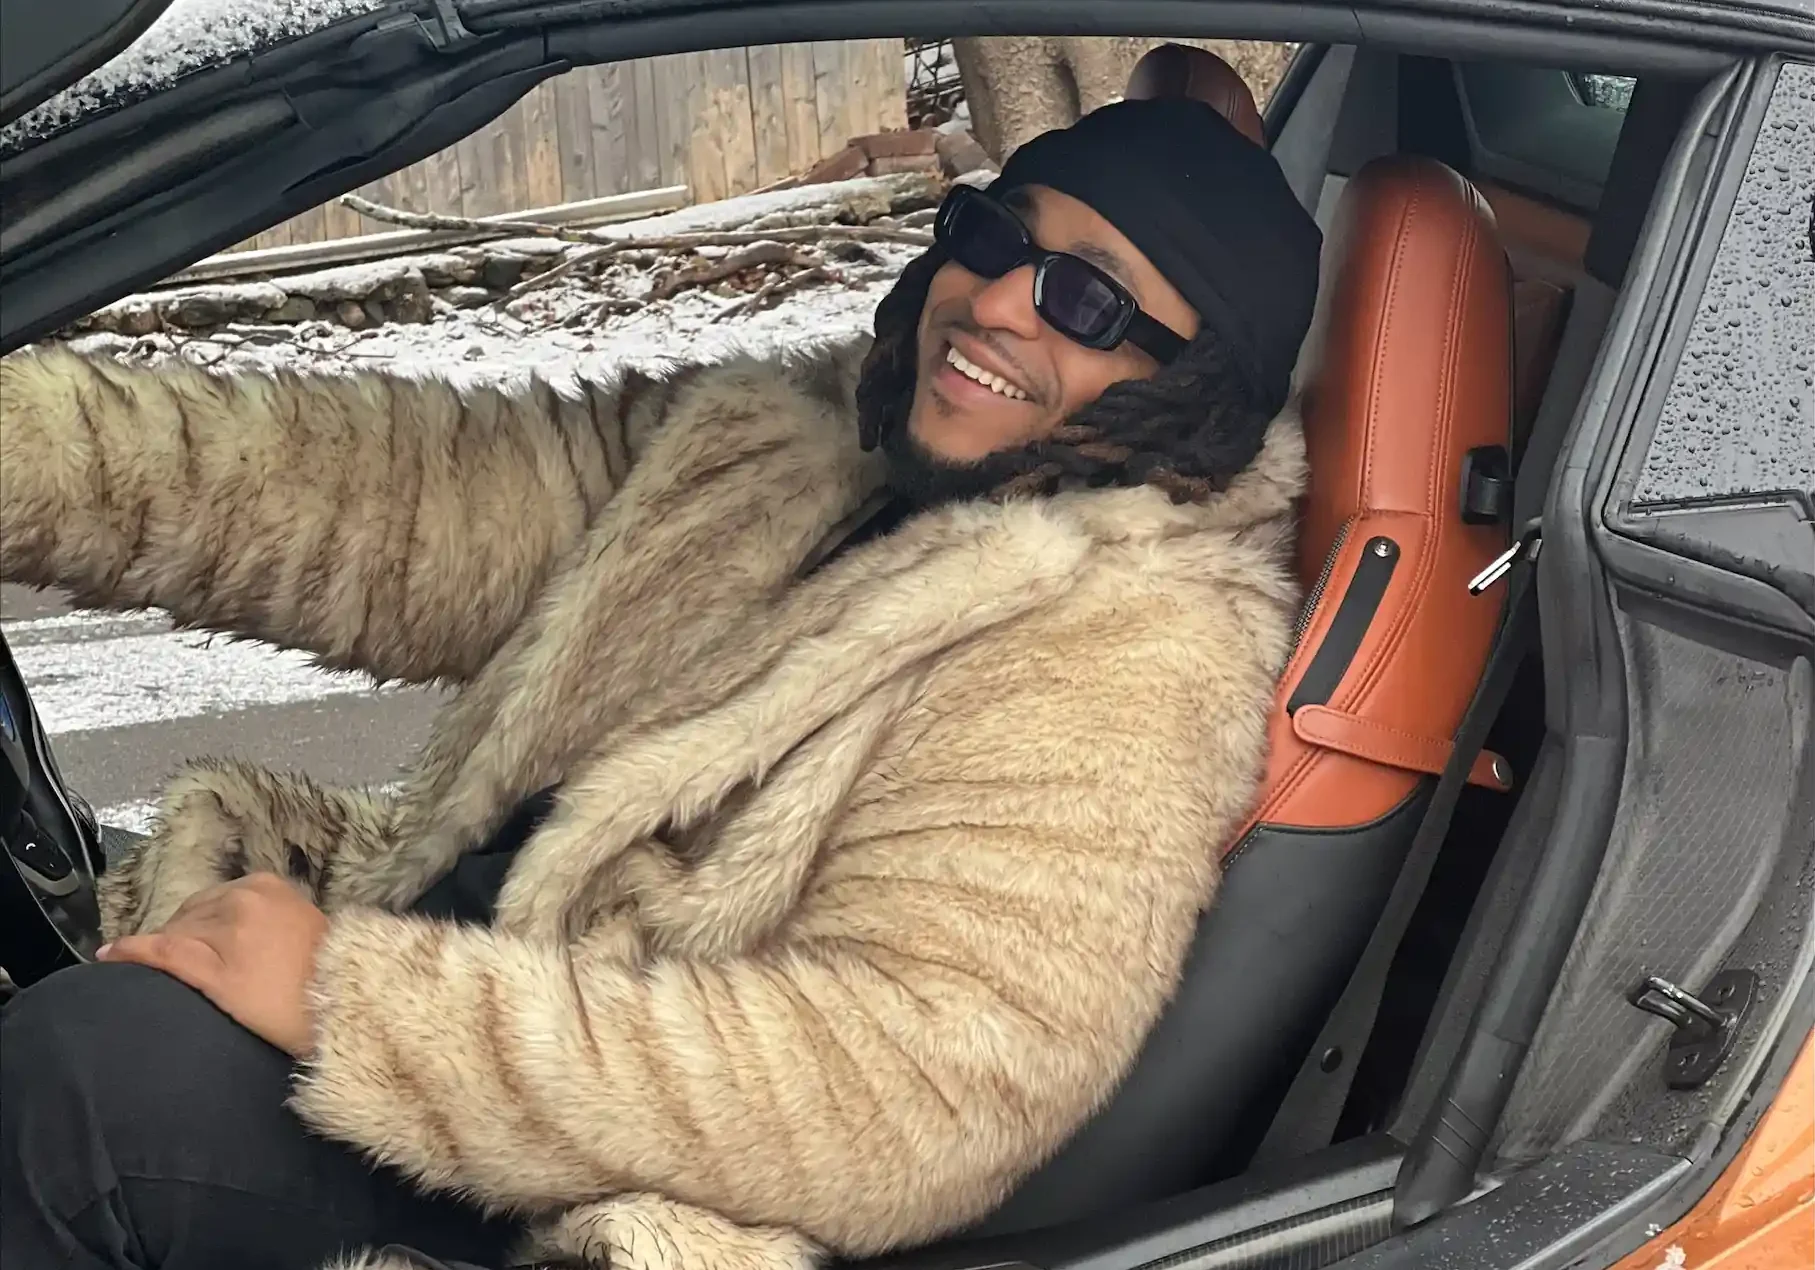 Apollo the Boss Unveils "Diamonds" Video From His Latest Album "King of the North 2" Featuring Blueface, Mozzy, and More